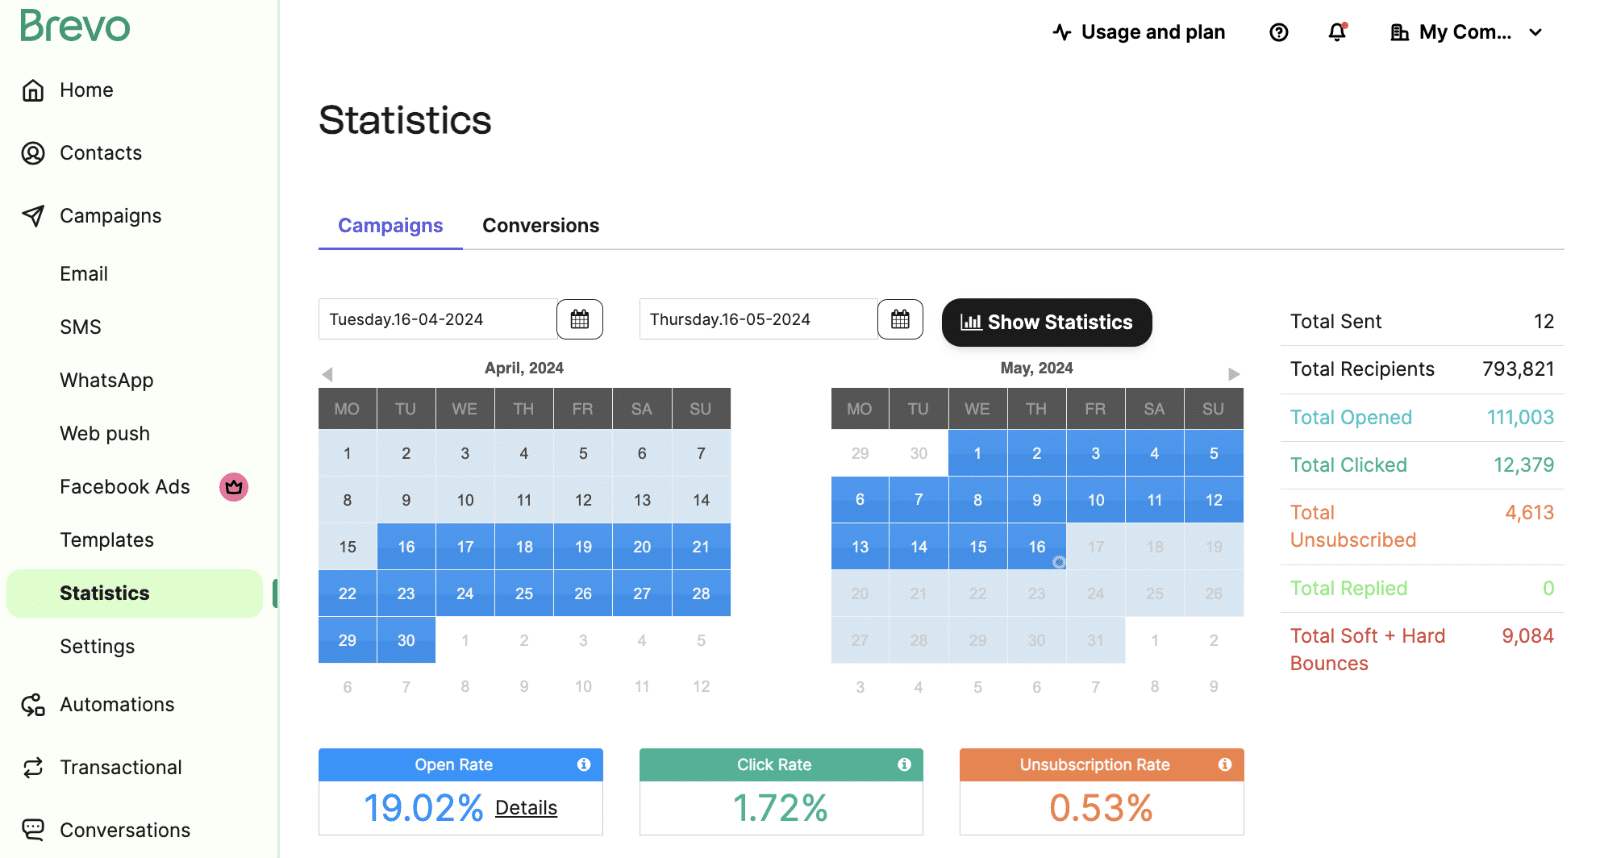 Viewing statistics for Brevo in your account dashboard